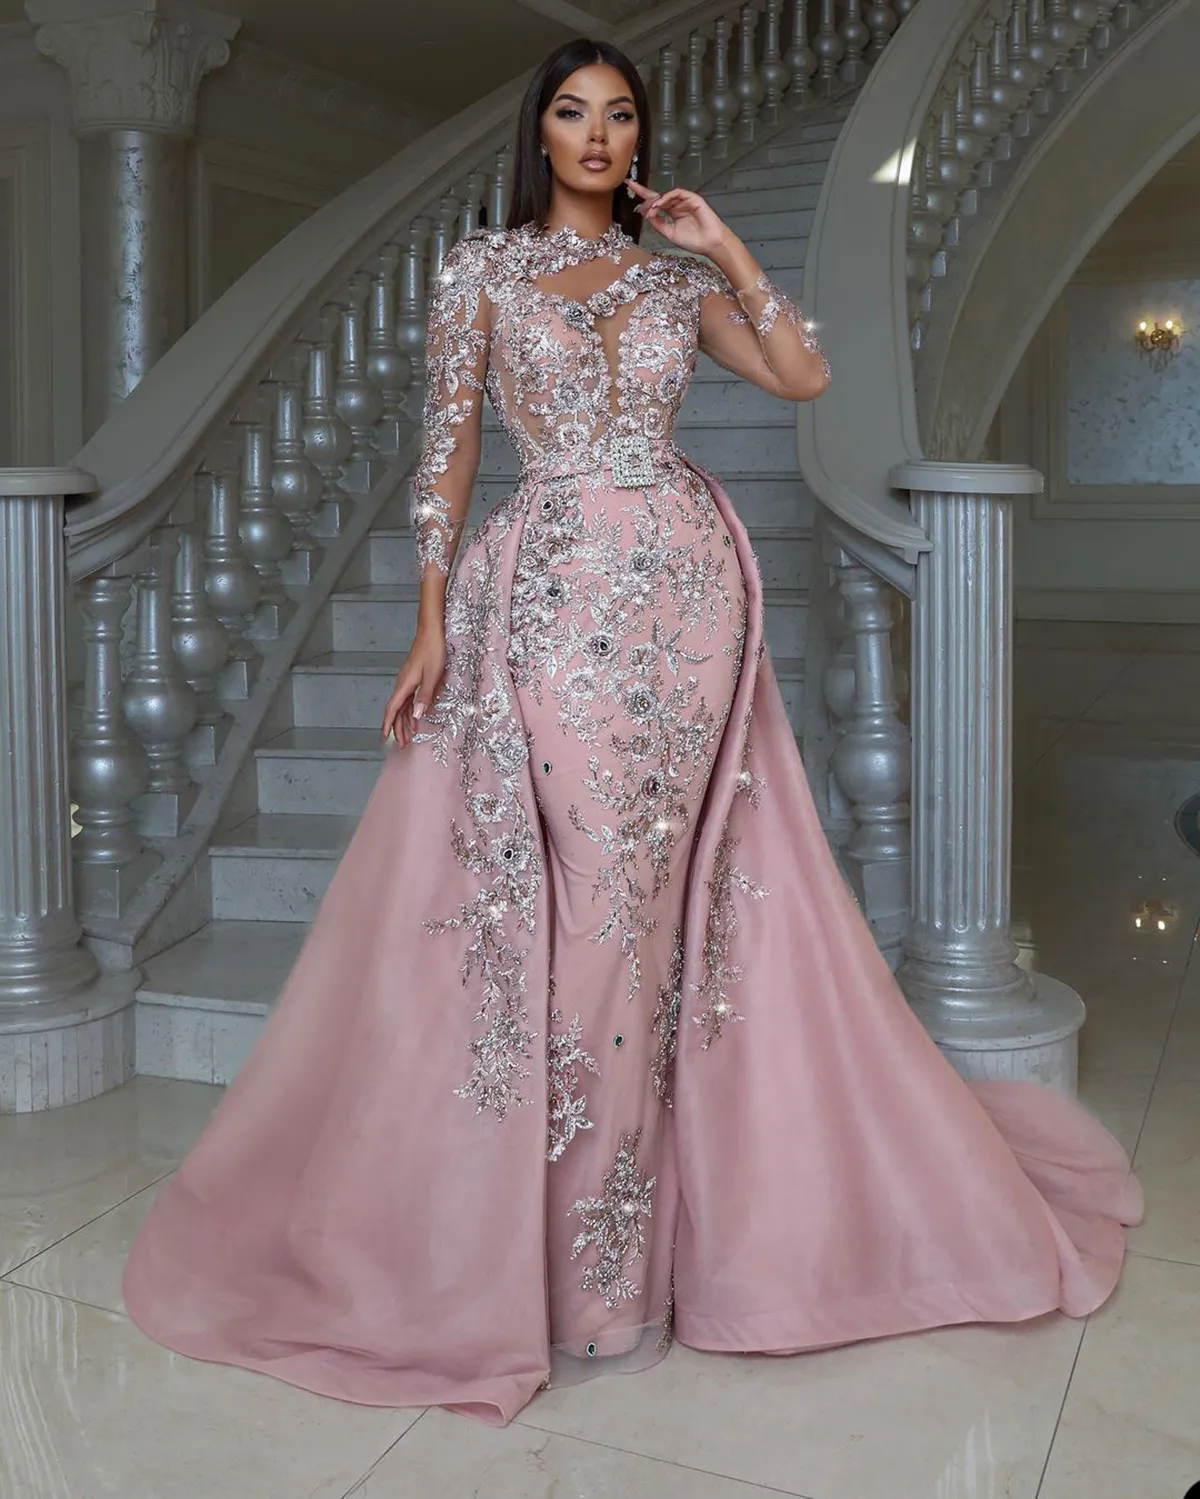 Luxury Pink Mermaid Evening Dress Woman Glitter Applique Flowers Prom Gowns Long Sleeves Party Night Dresses